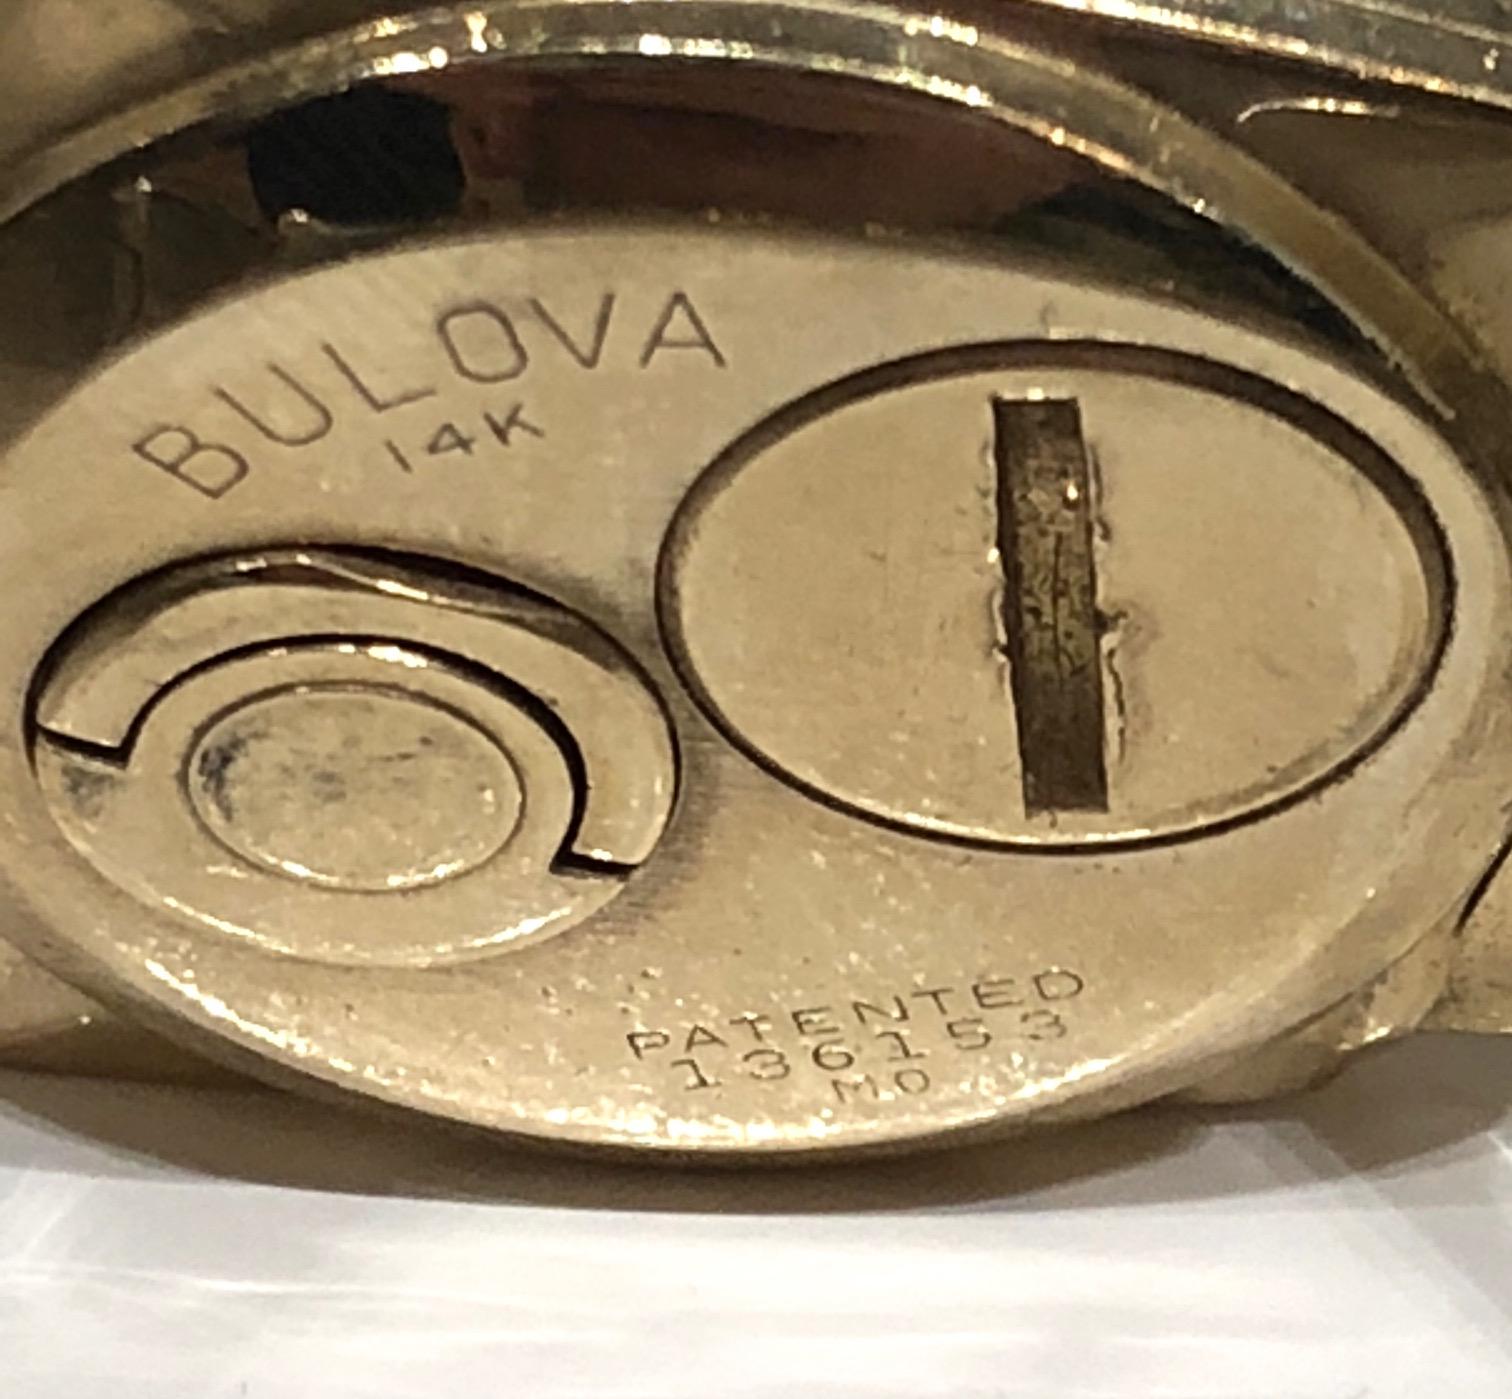 Mens Bulova Accutron 14K case with rolled gold stretch armband bracelet strap , crown winder on back. Ca 1960's. Slight nick on the wrist band.